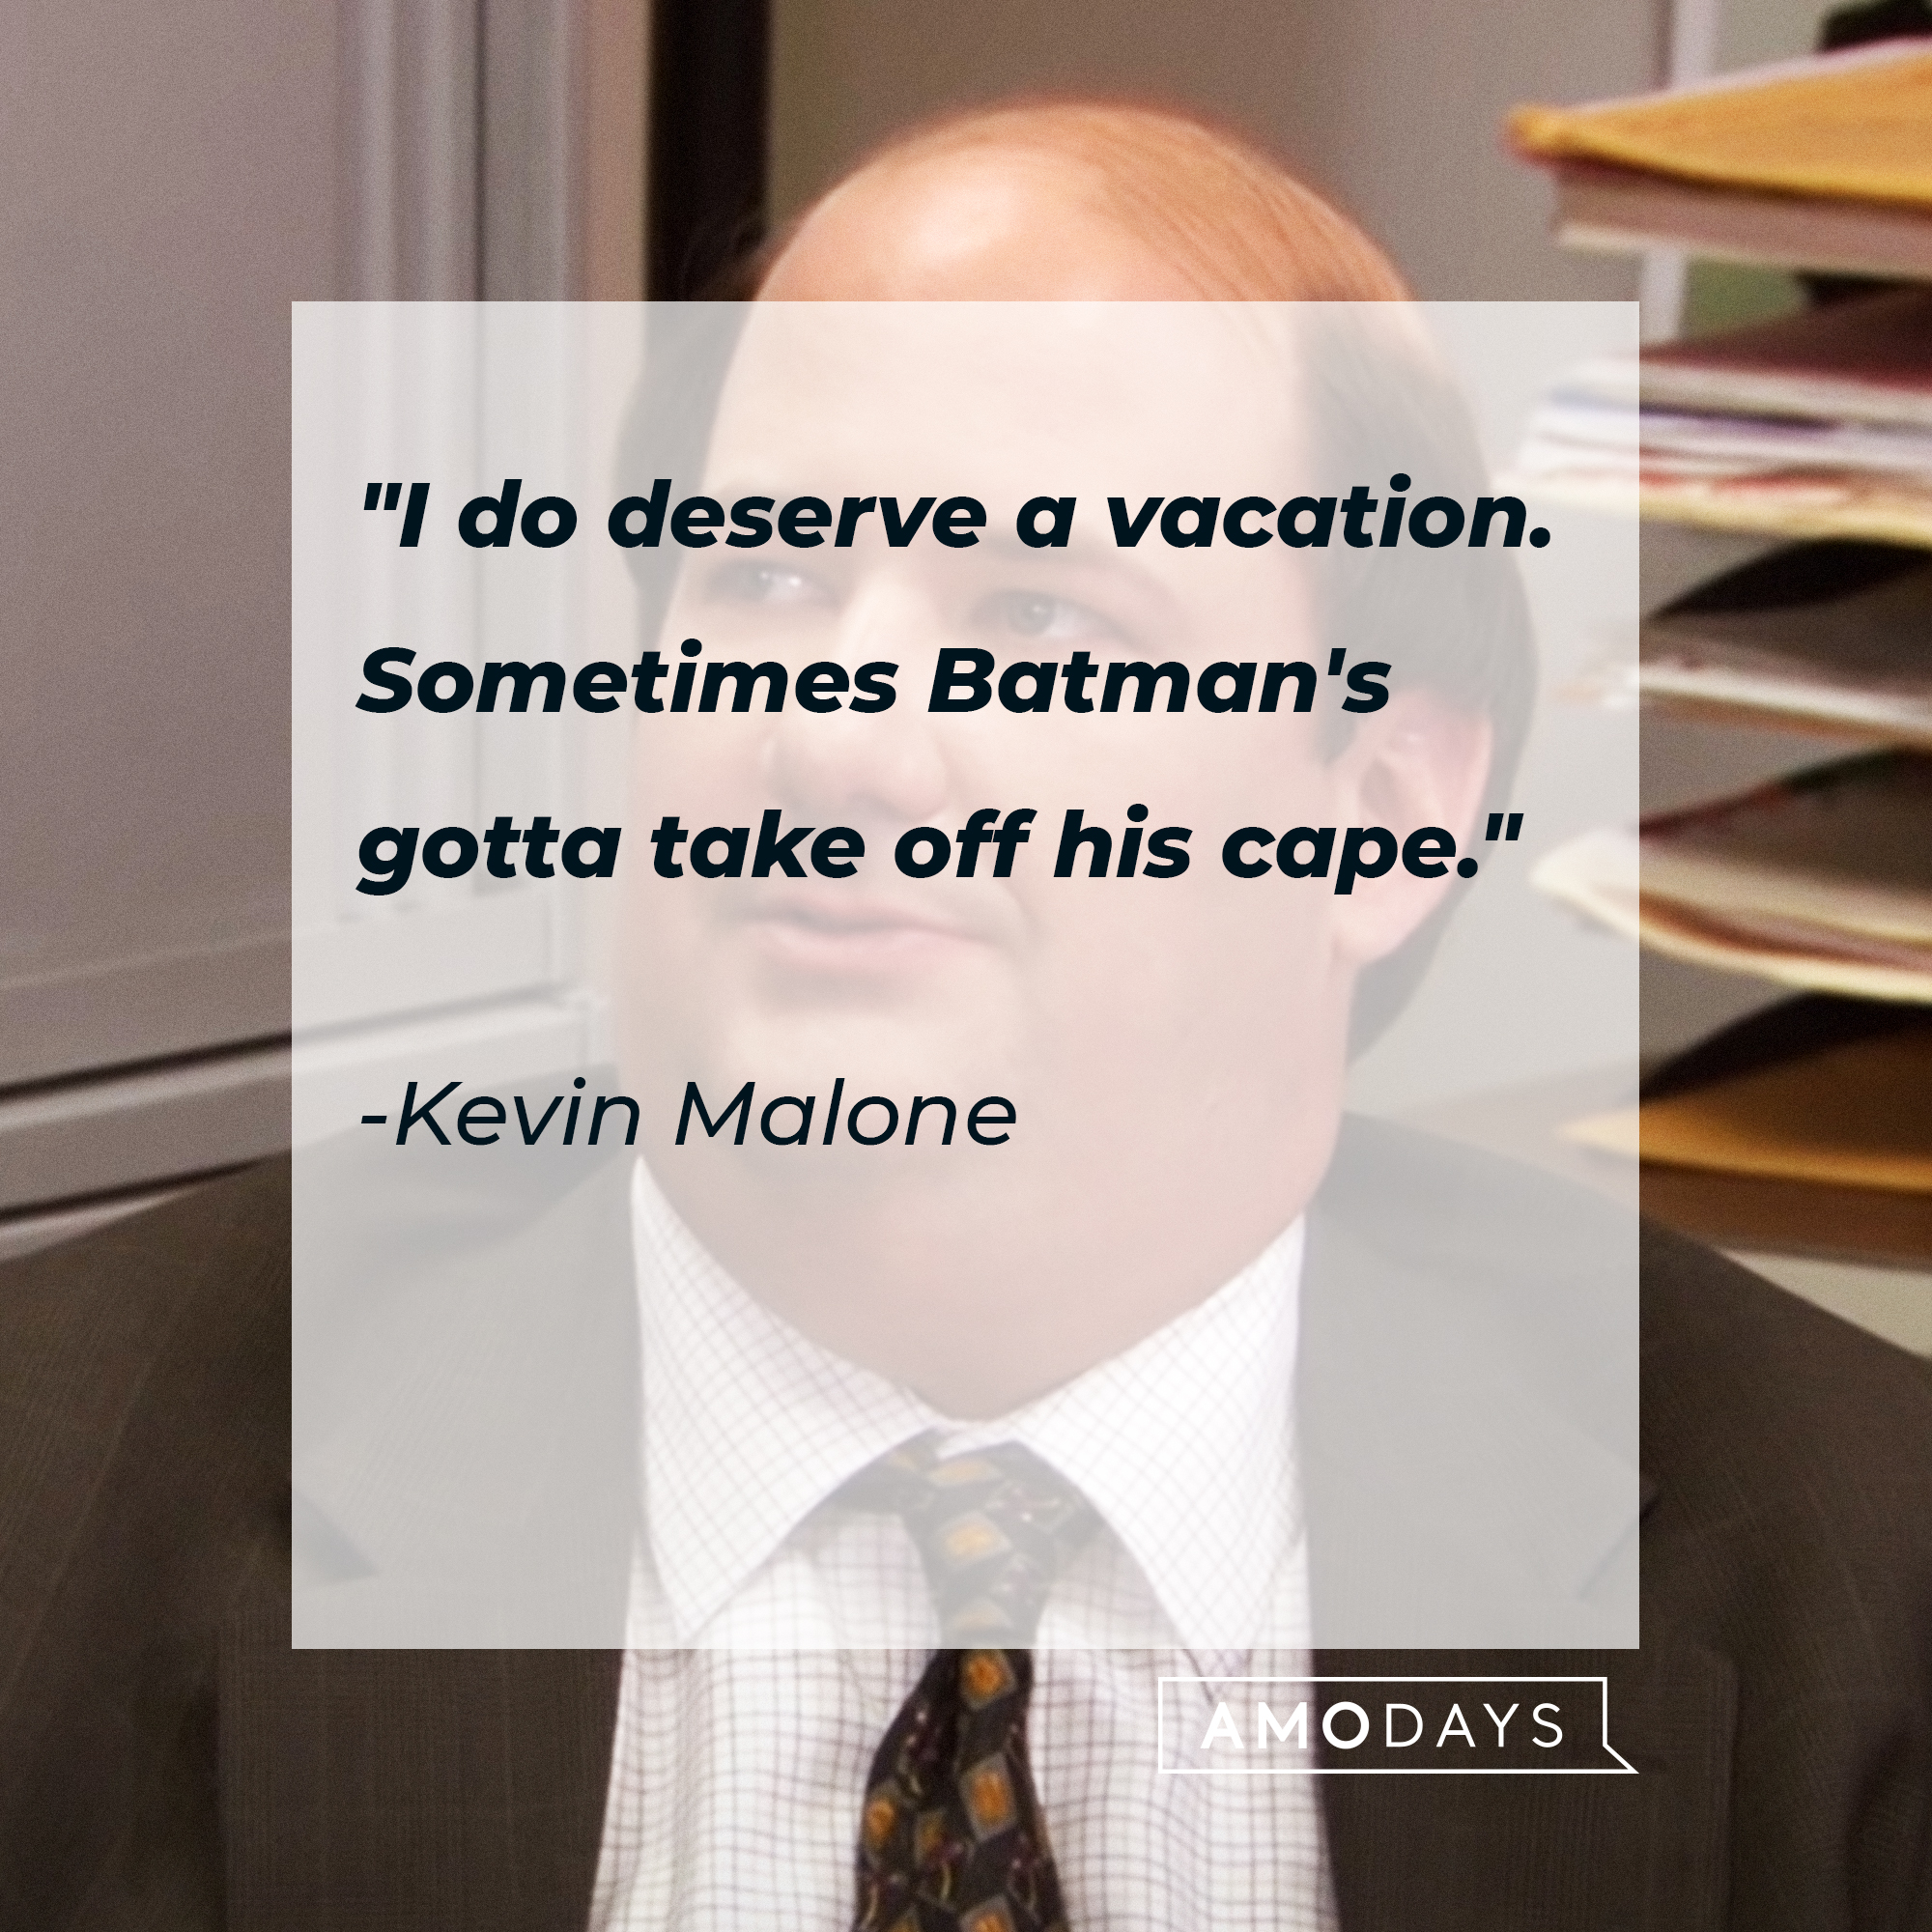 An image of Kevin Malone, with his quote: "I do deserve a vacation. Sometimes Batman's gotta take off his cape." | Source: Youtube.com/The Office